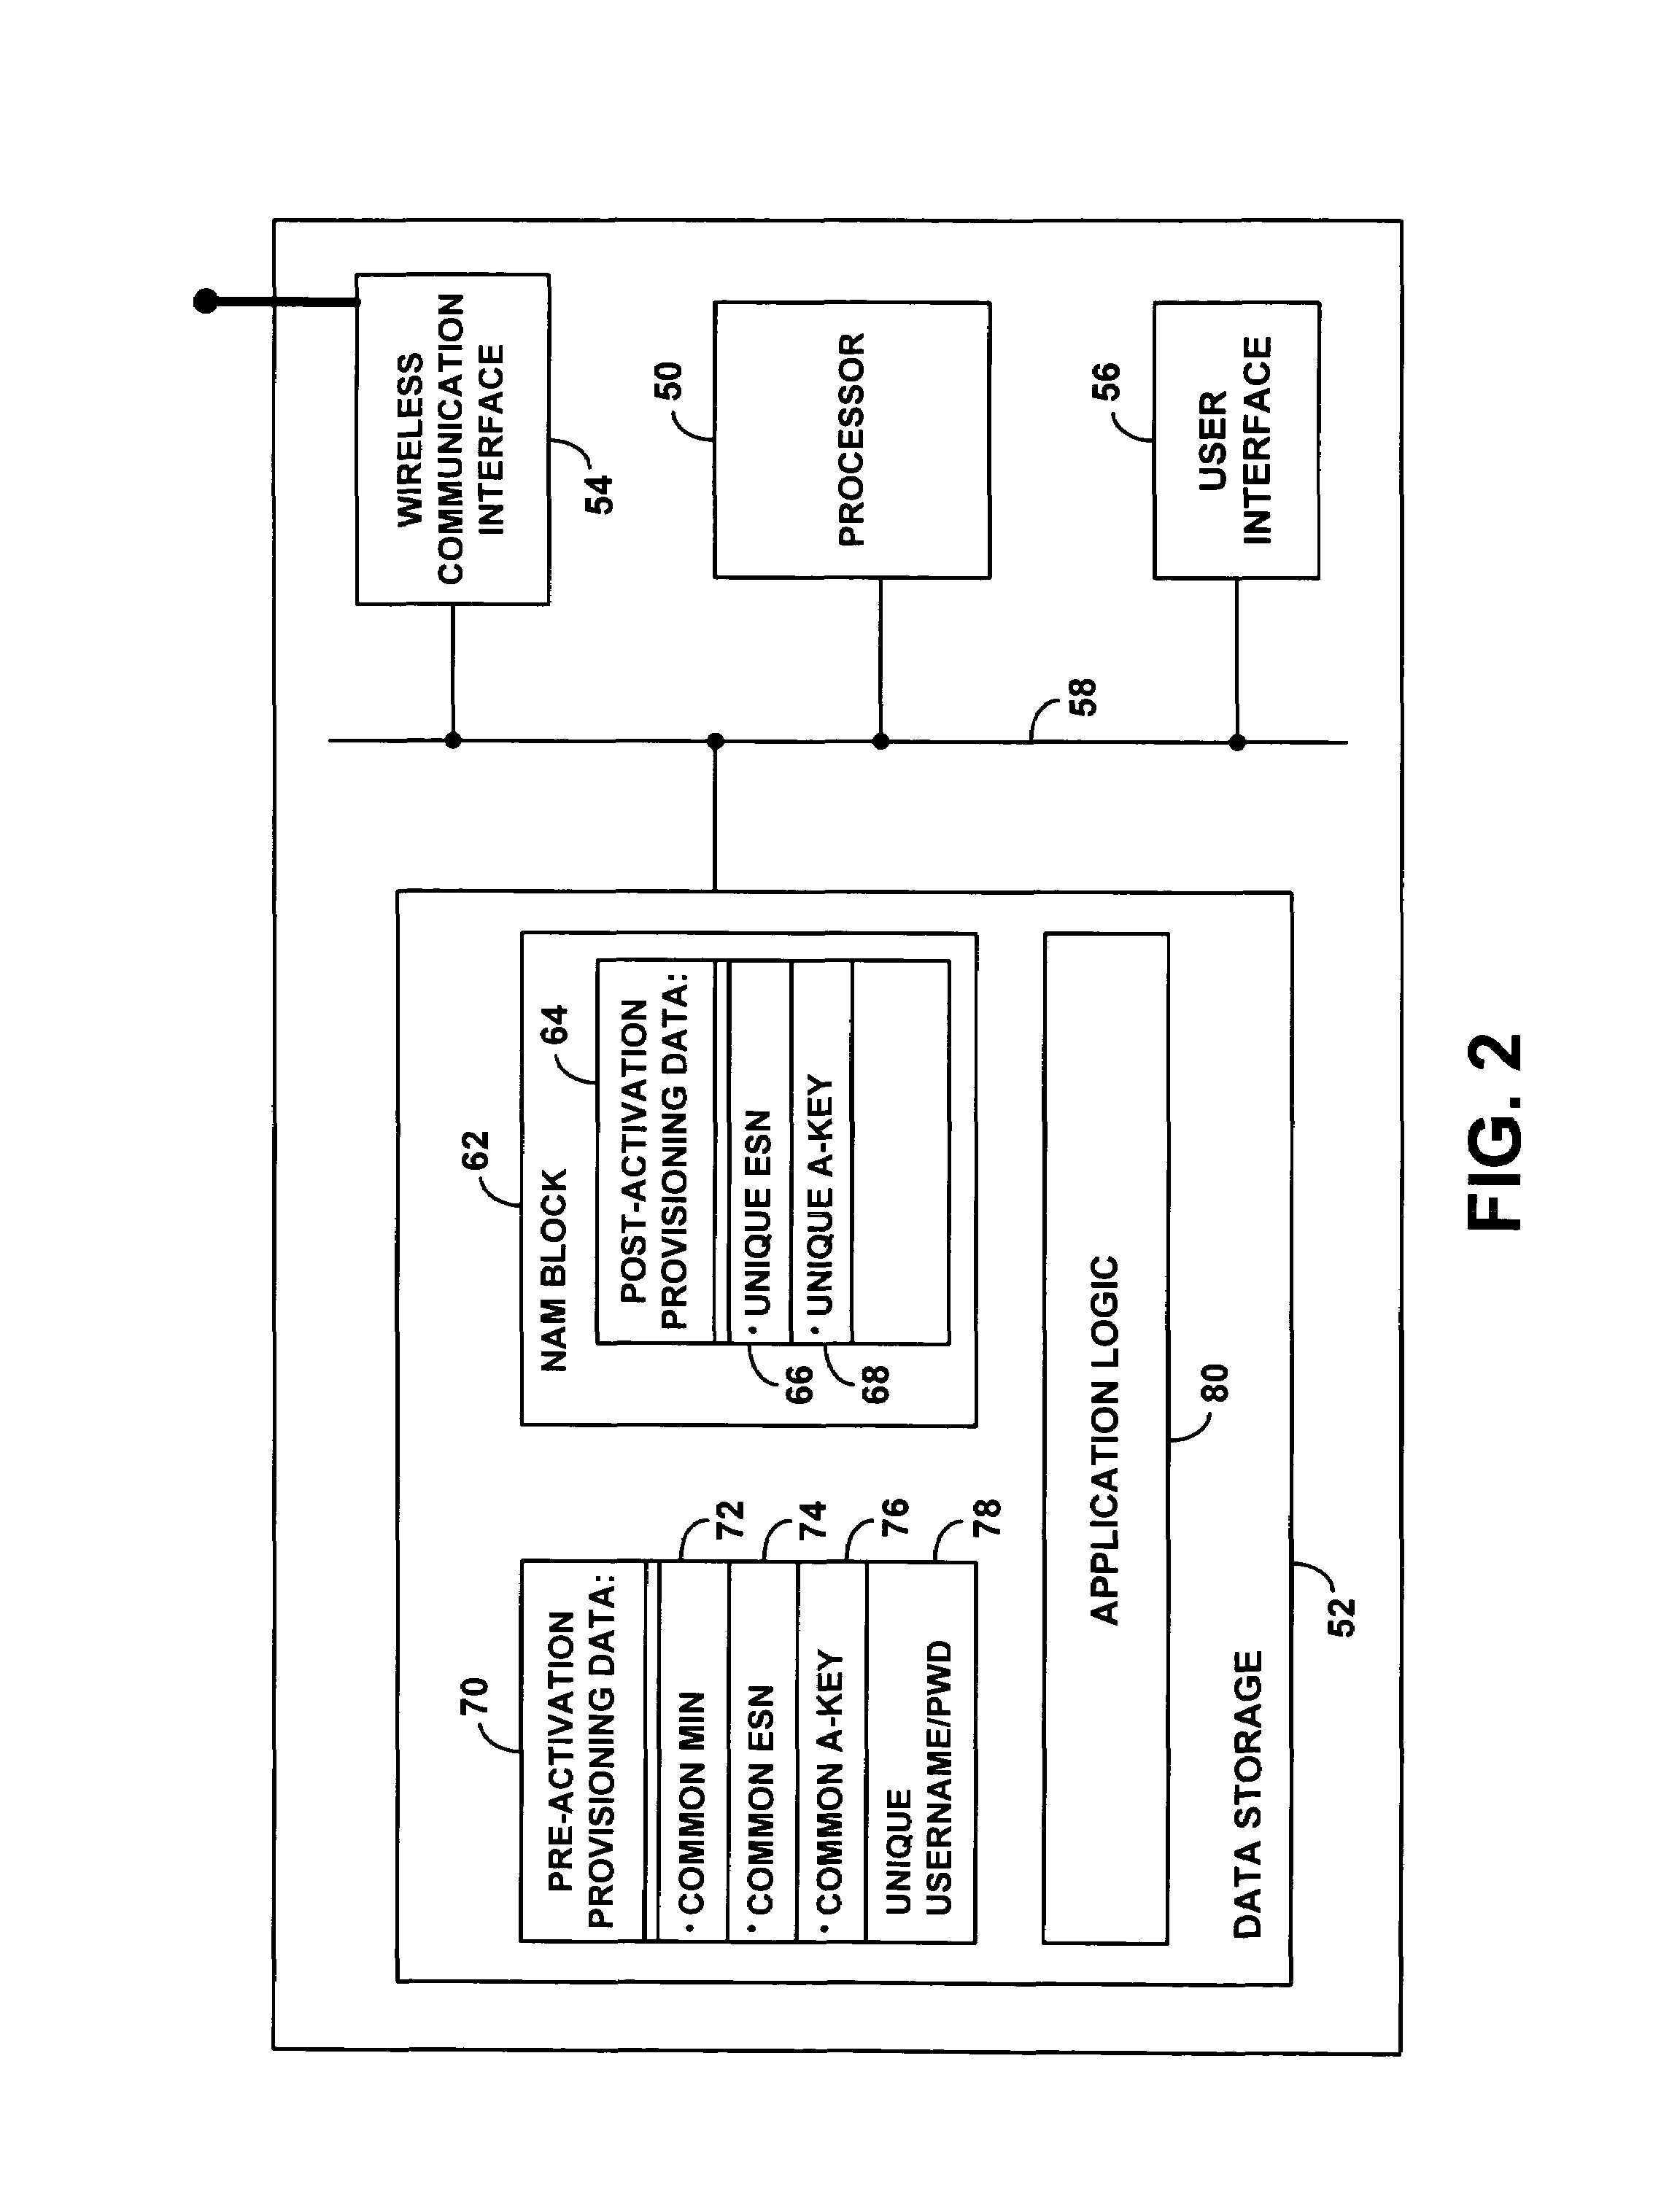 Method and system for use of common provisioning data to activate cellular wireless devices